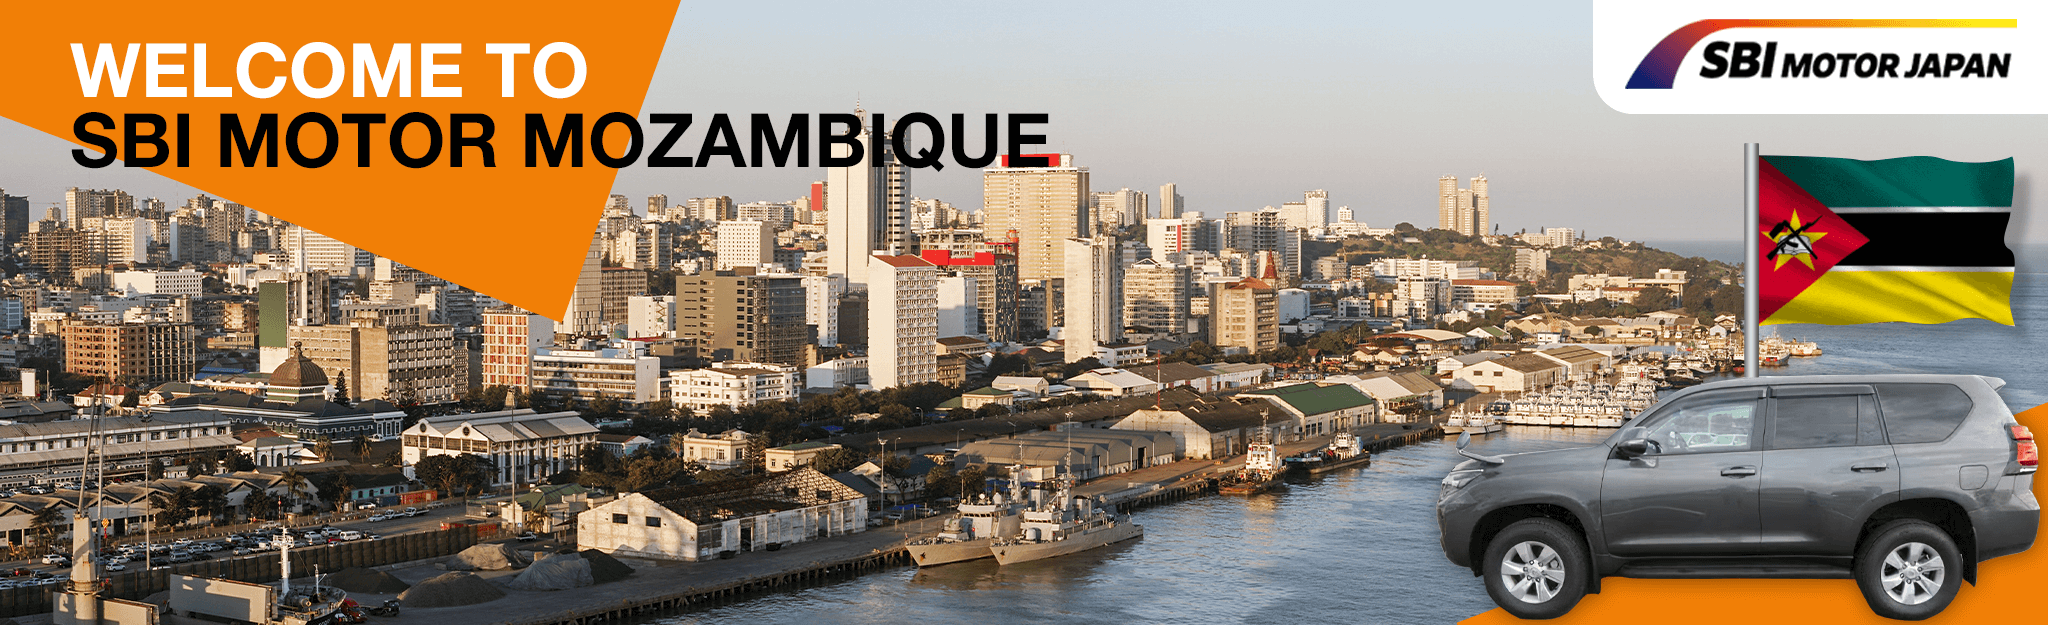 Welcome to SBI Mozambique. You can get local support in Mozambique! We offer sophisticated Japanese used cars.